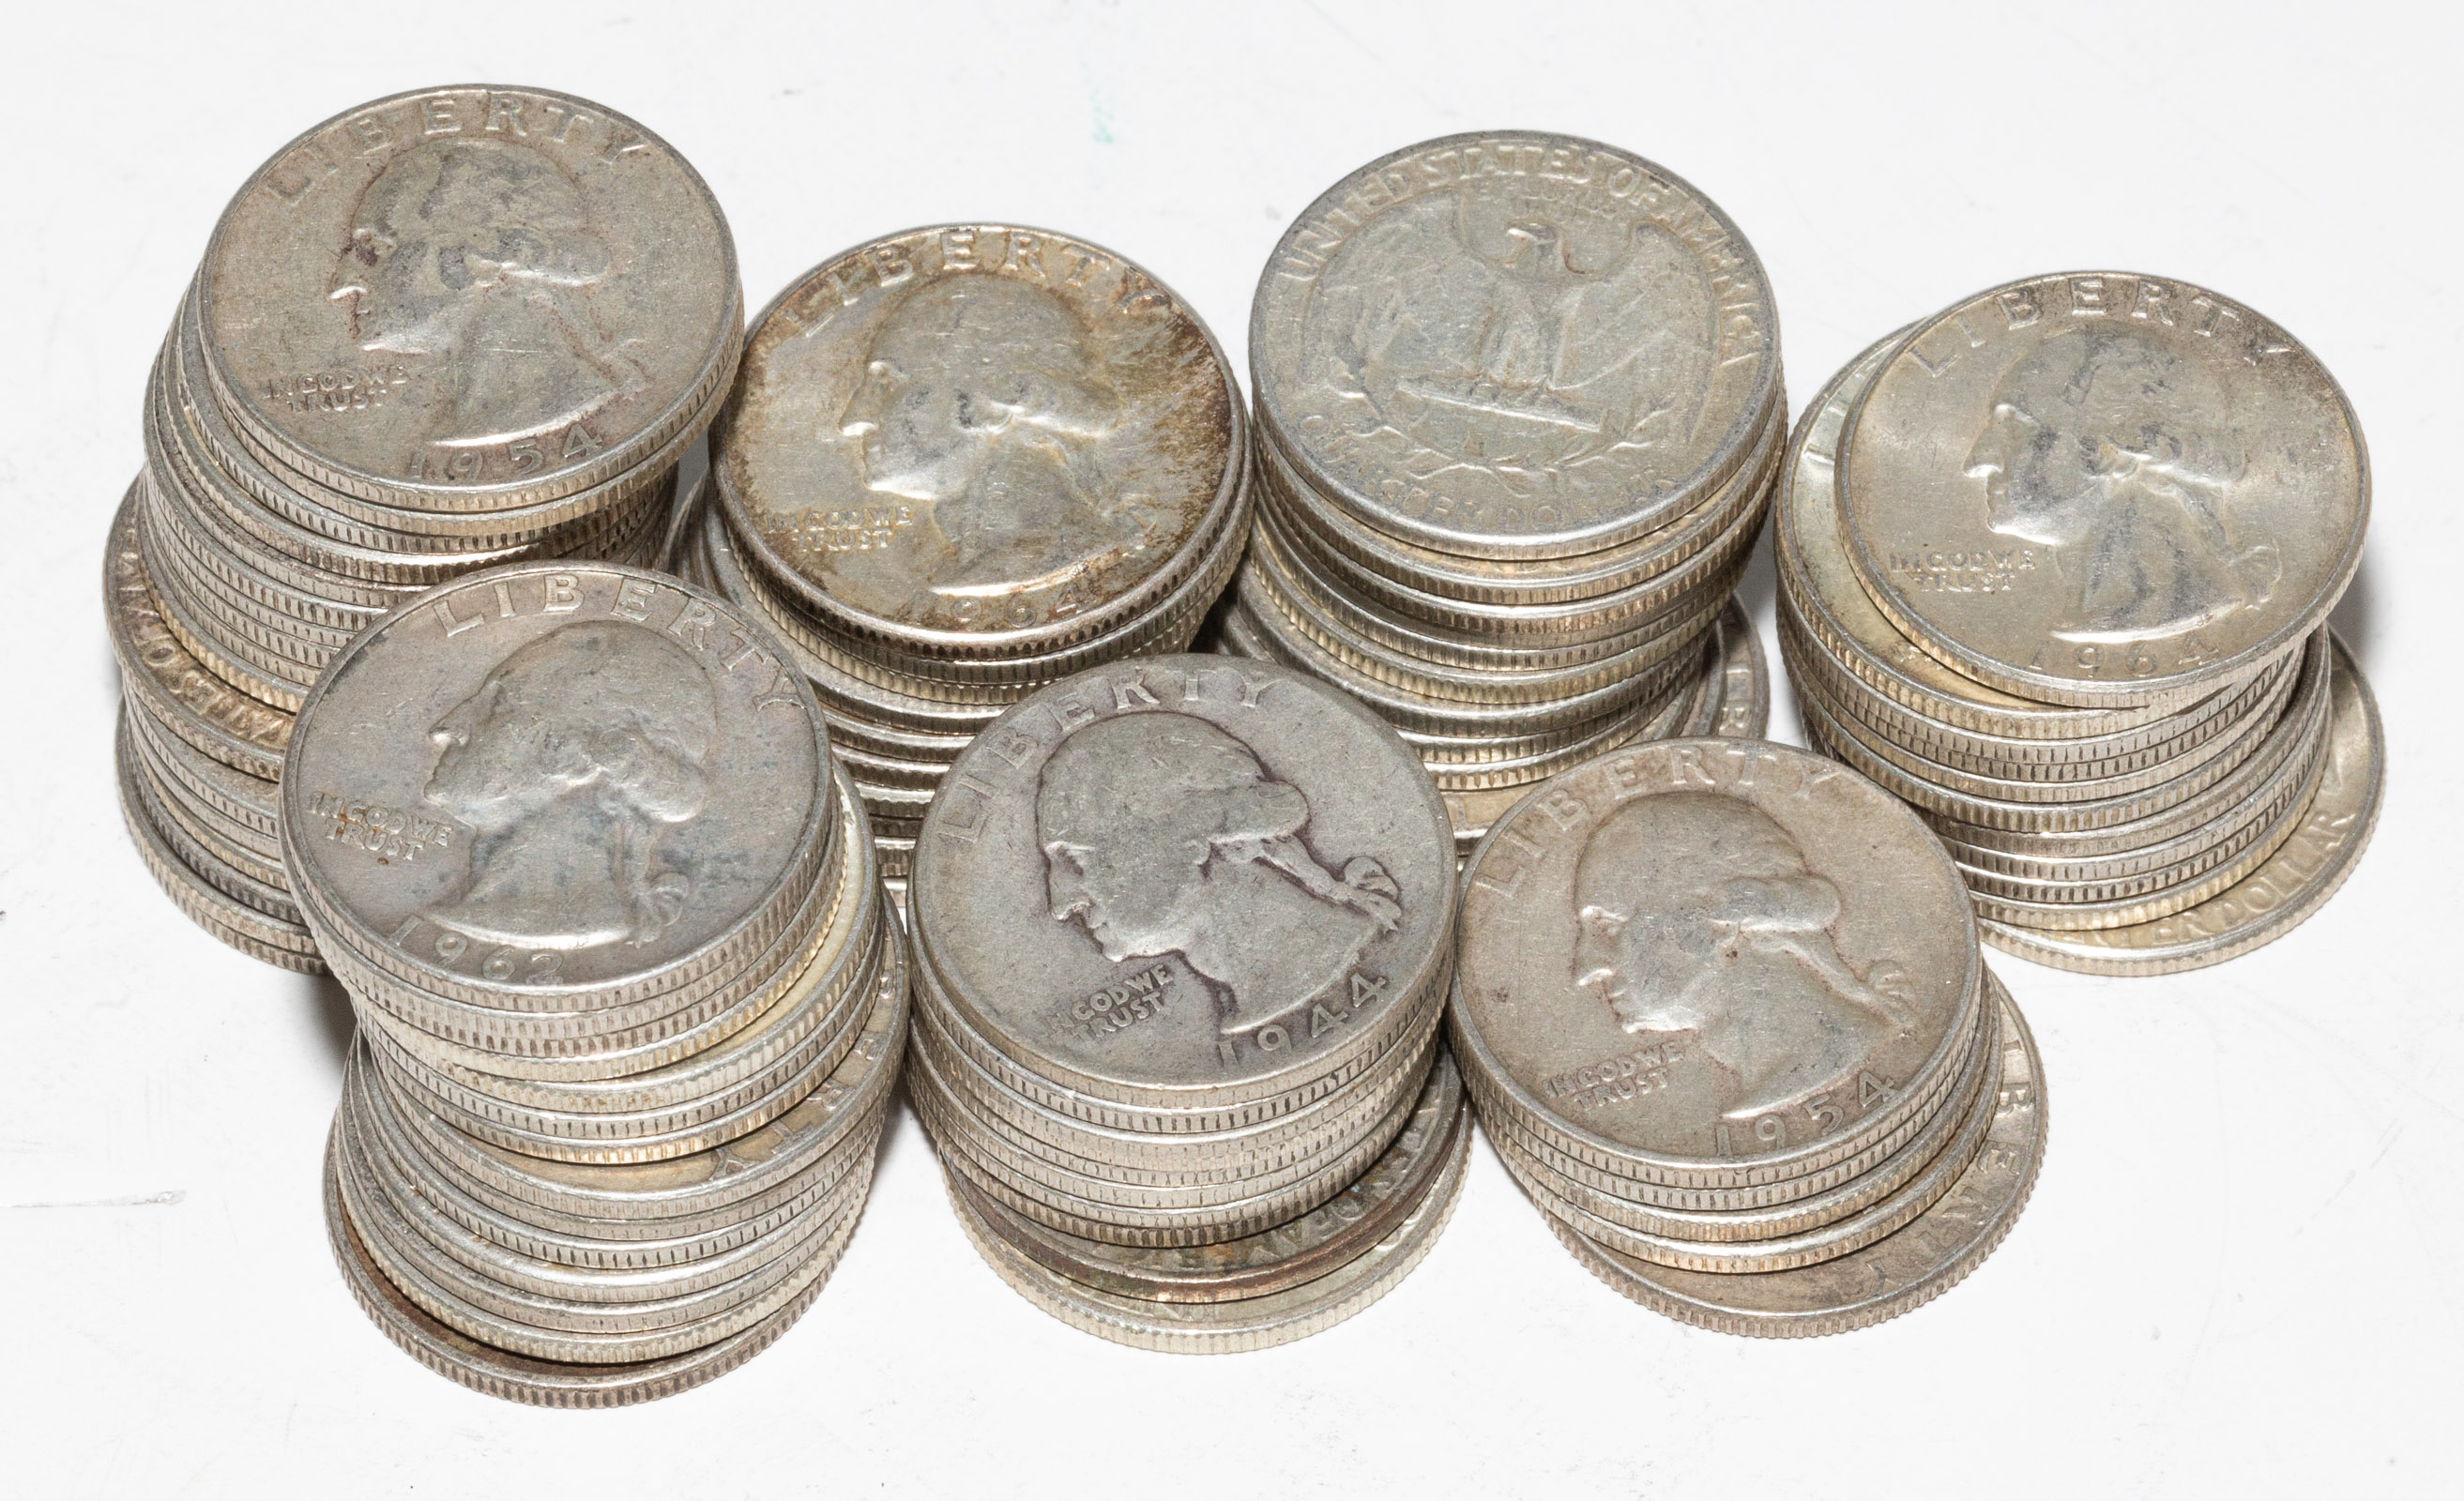 APPROXIMATELY 80 SILVER US QUARTERS